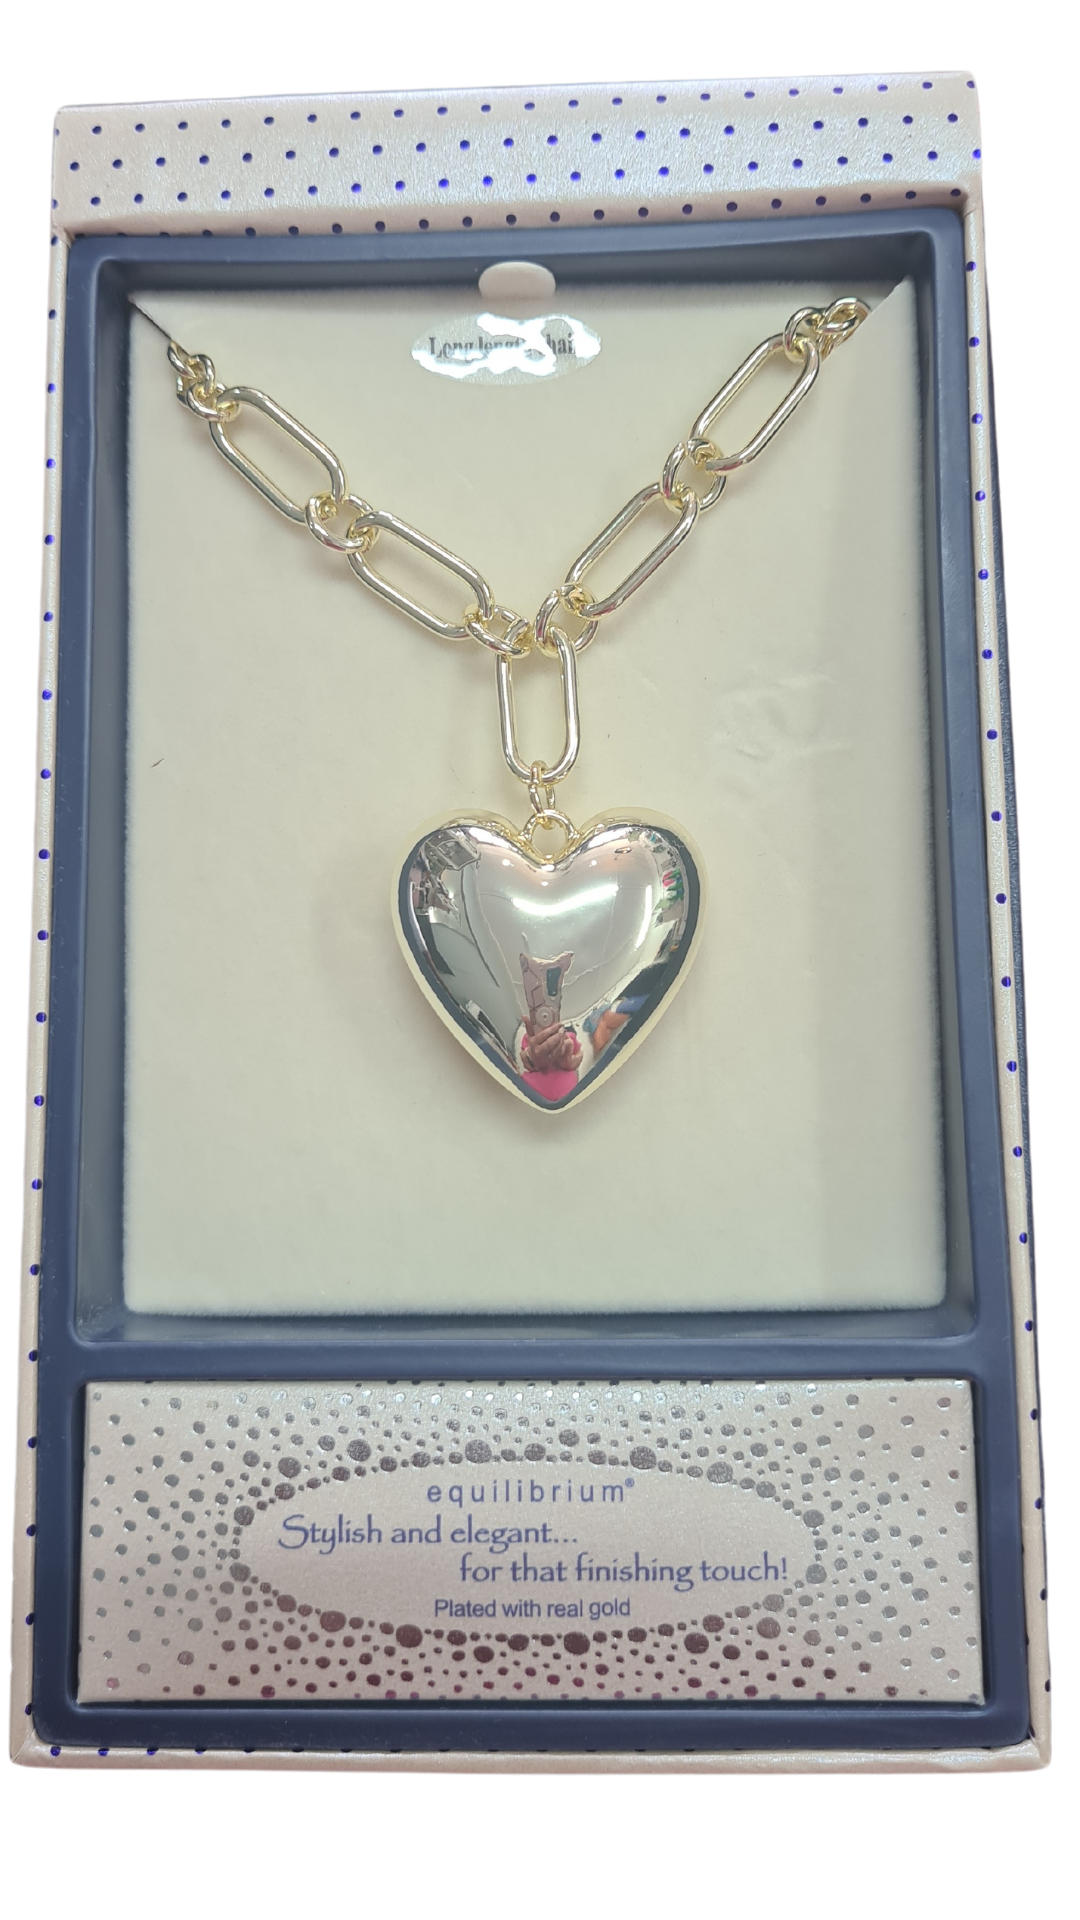 Heart Long Chain Necklace